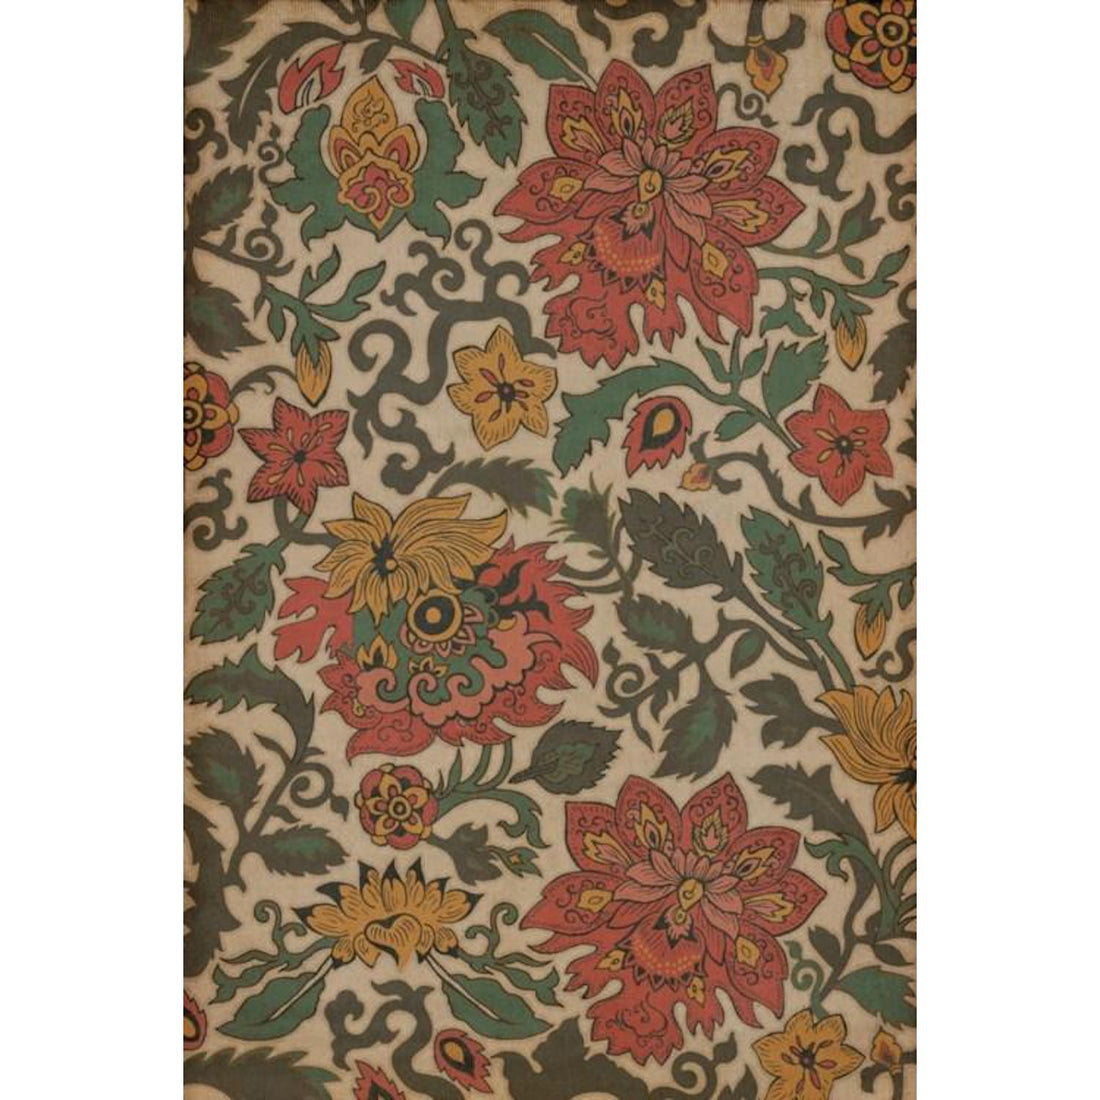 Pacific Ring of Fire Vinyl Rug - Pattern 71